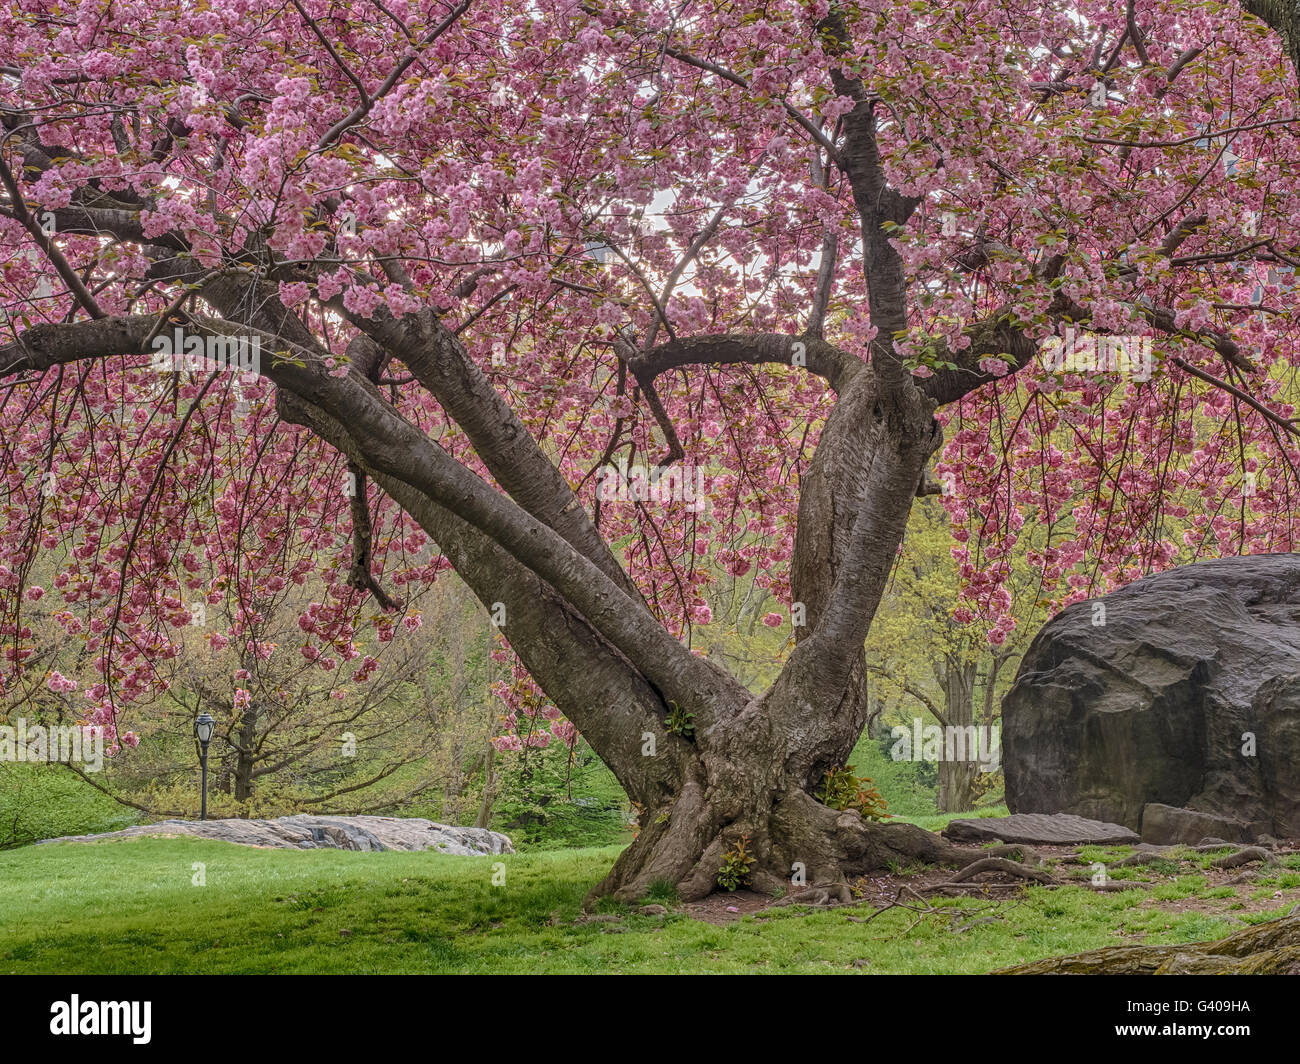 Prunus serrulata or Japanese Cherry; also called Hill Cherry, Oriental Cherry or East Asian Cherry, is a species of cherry nativ Stock Photo